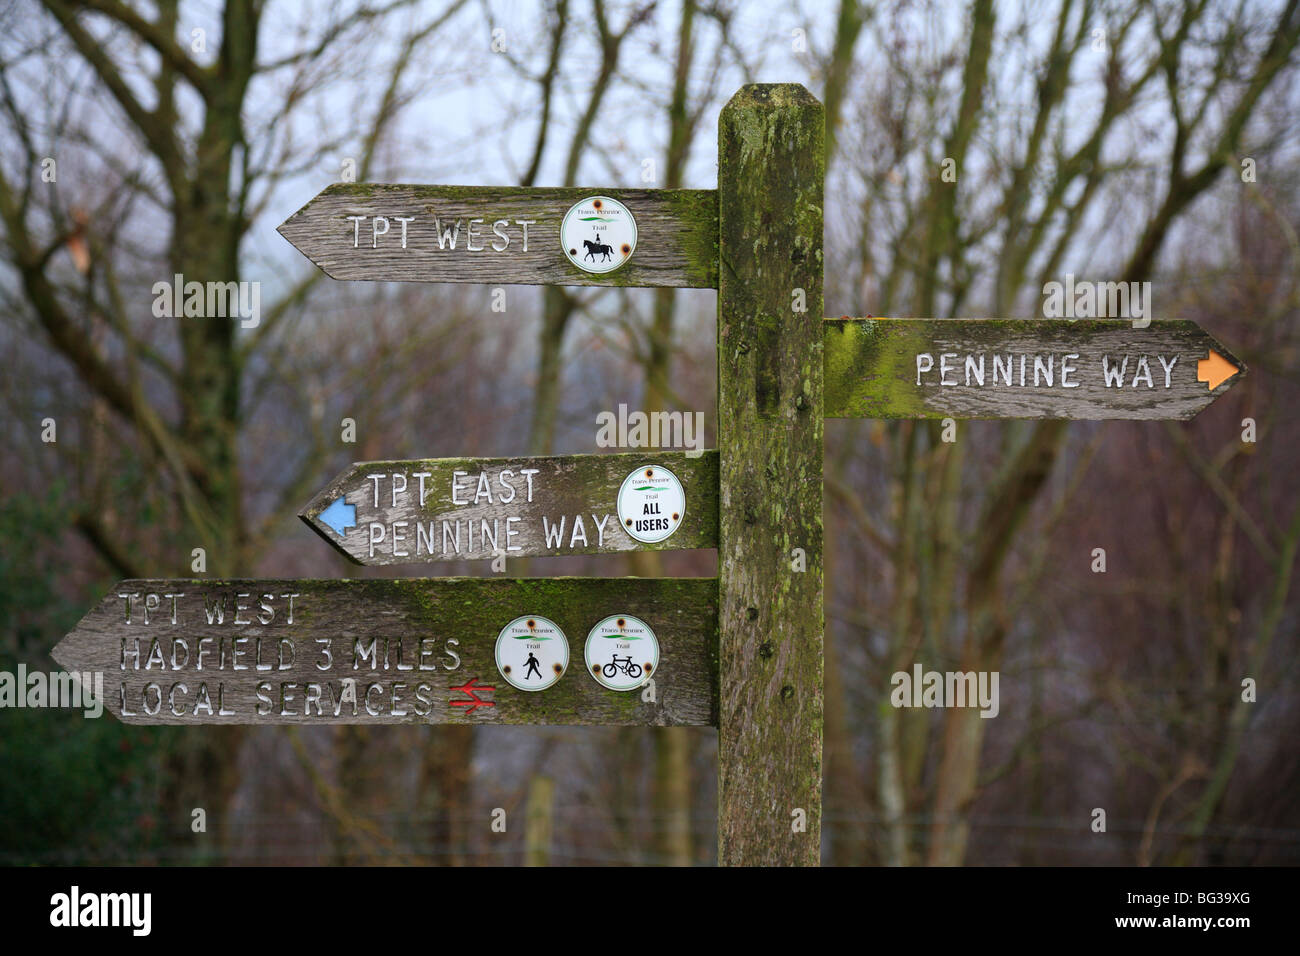 Wooden finger post marking TPT West, Pennine Way and TPT East routes for walkers, cyclists and riders, Longdendale, Derbyshire, Peak District, England. Stock Photo